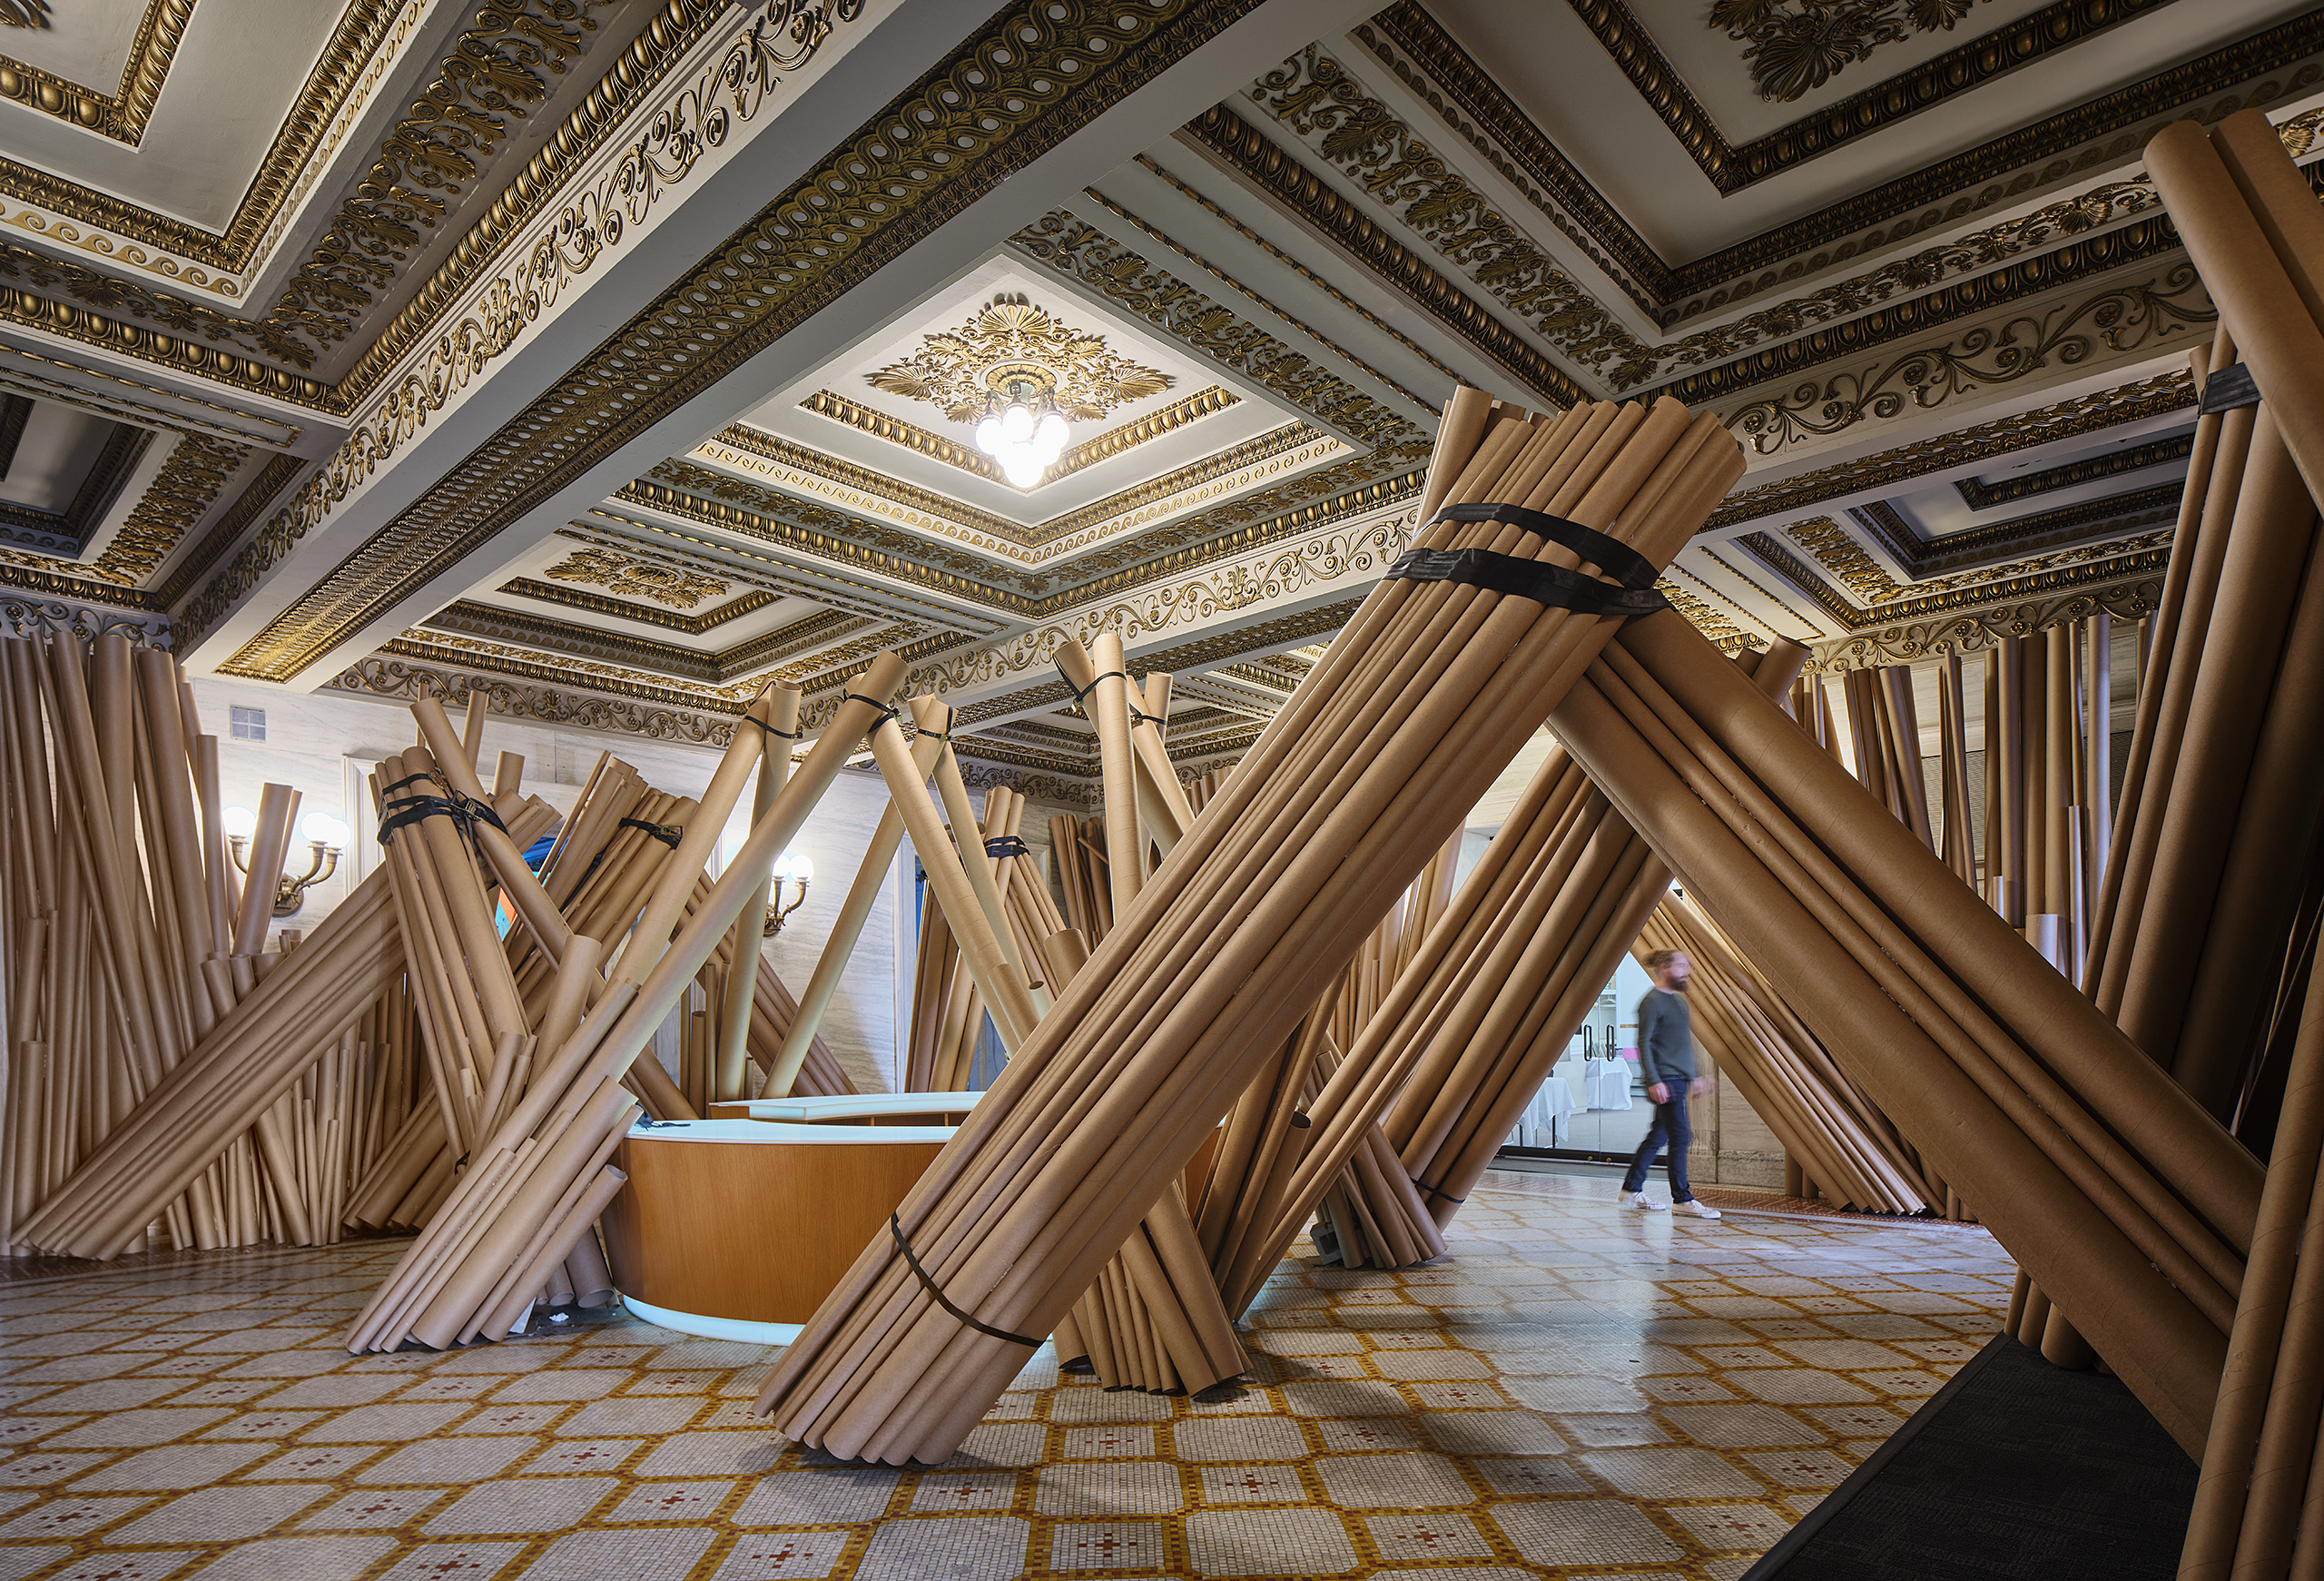 7 exhibits not to miss during the Chicago Architecture Biennial